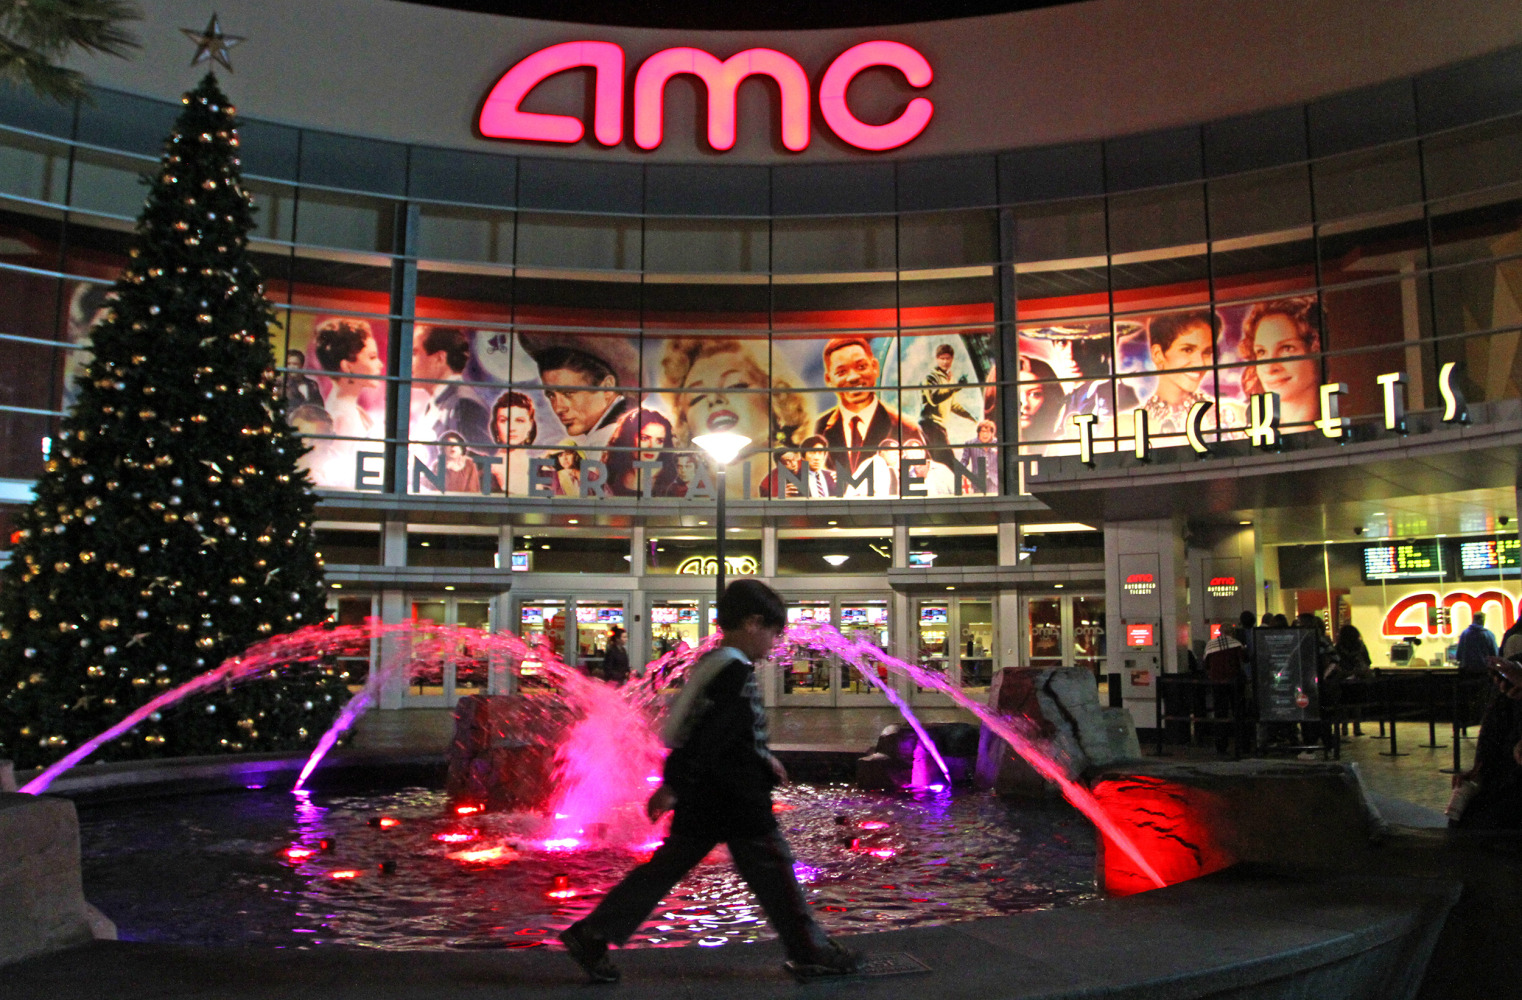 Follow us for all things movies and get tix ⬇ www.amctheatres.com/showtimes. 